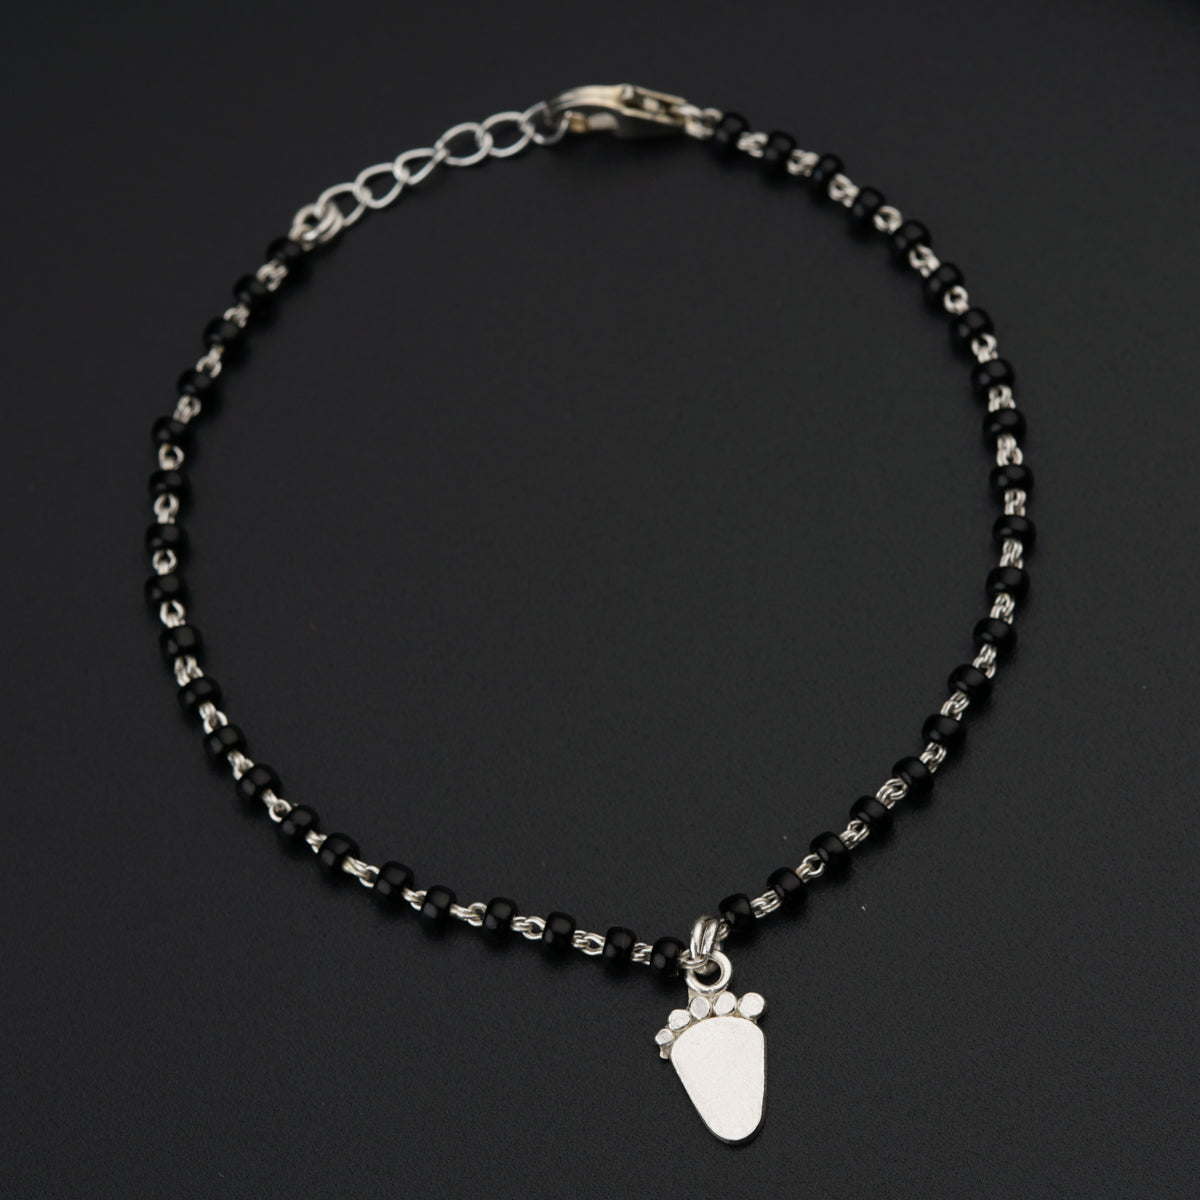 a black beaded bracelet with a silver charm